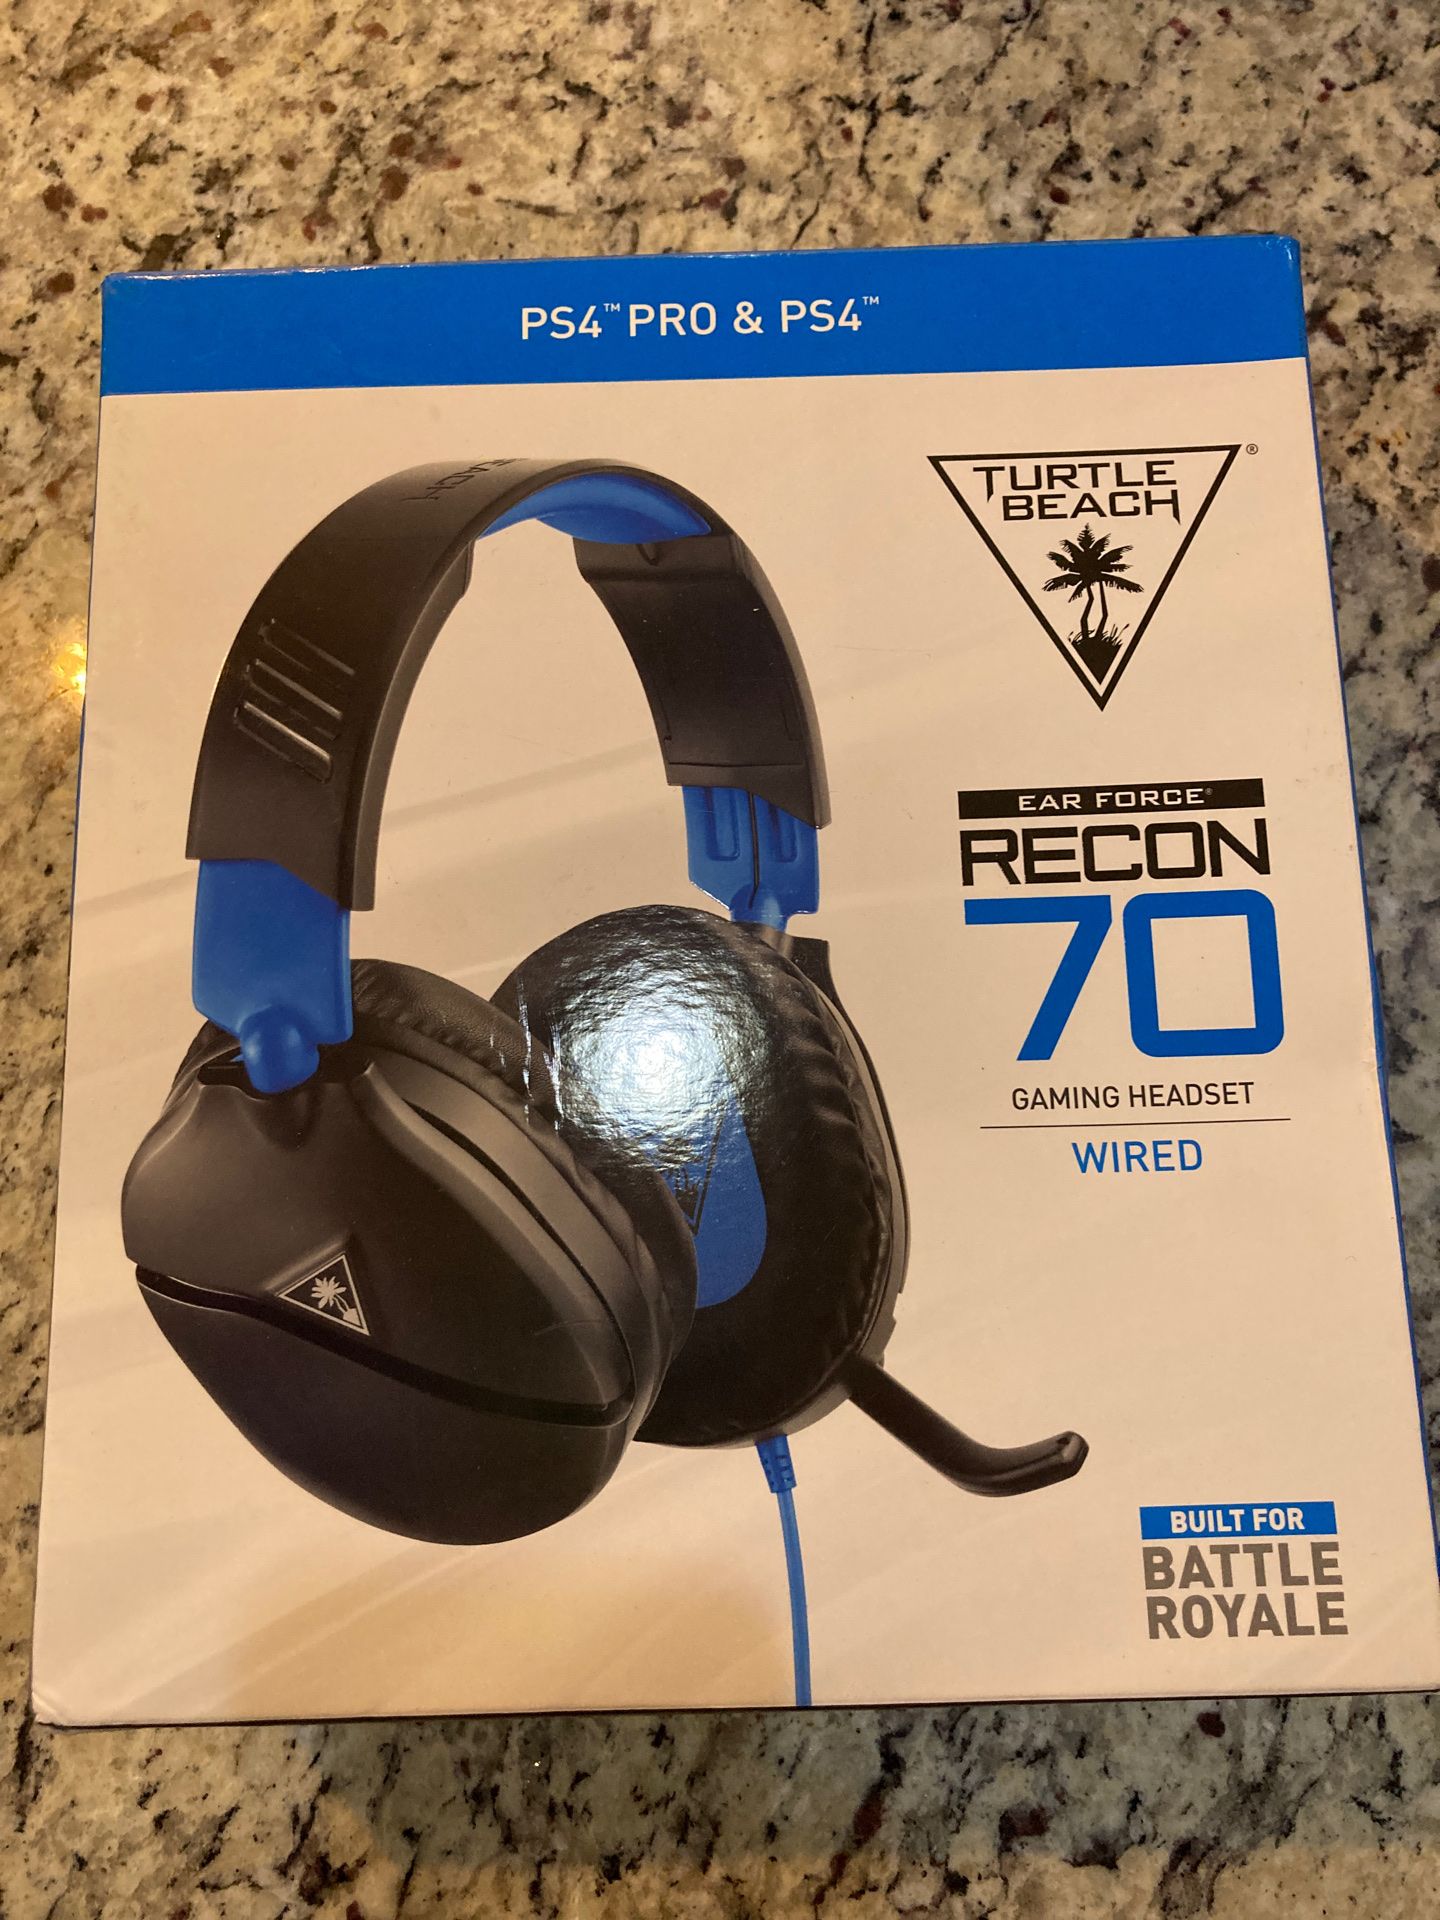 TURTLE BEACH RECON 70 GAMING HEADSET WIRED FOR PS 4 PRO & PS4 NEW